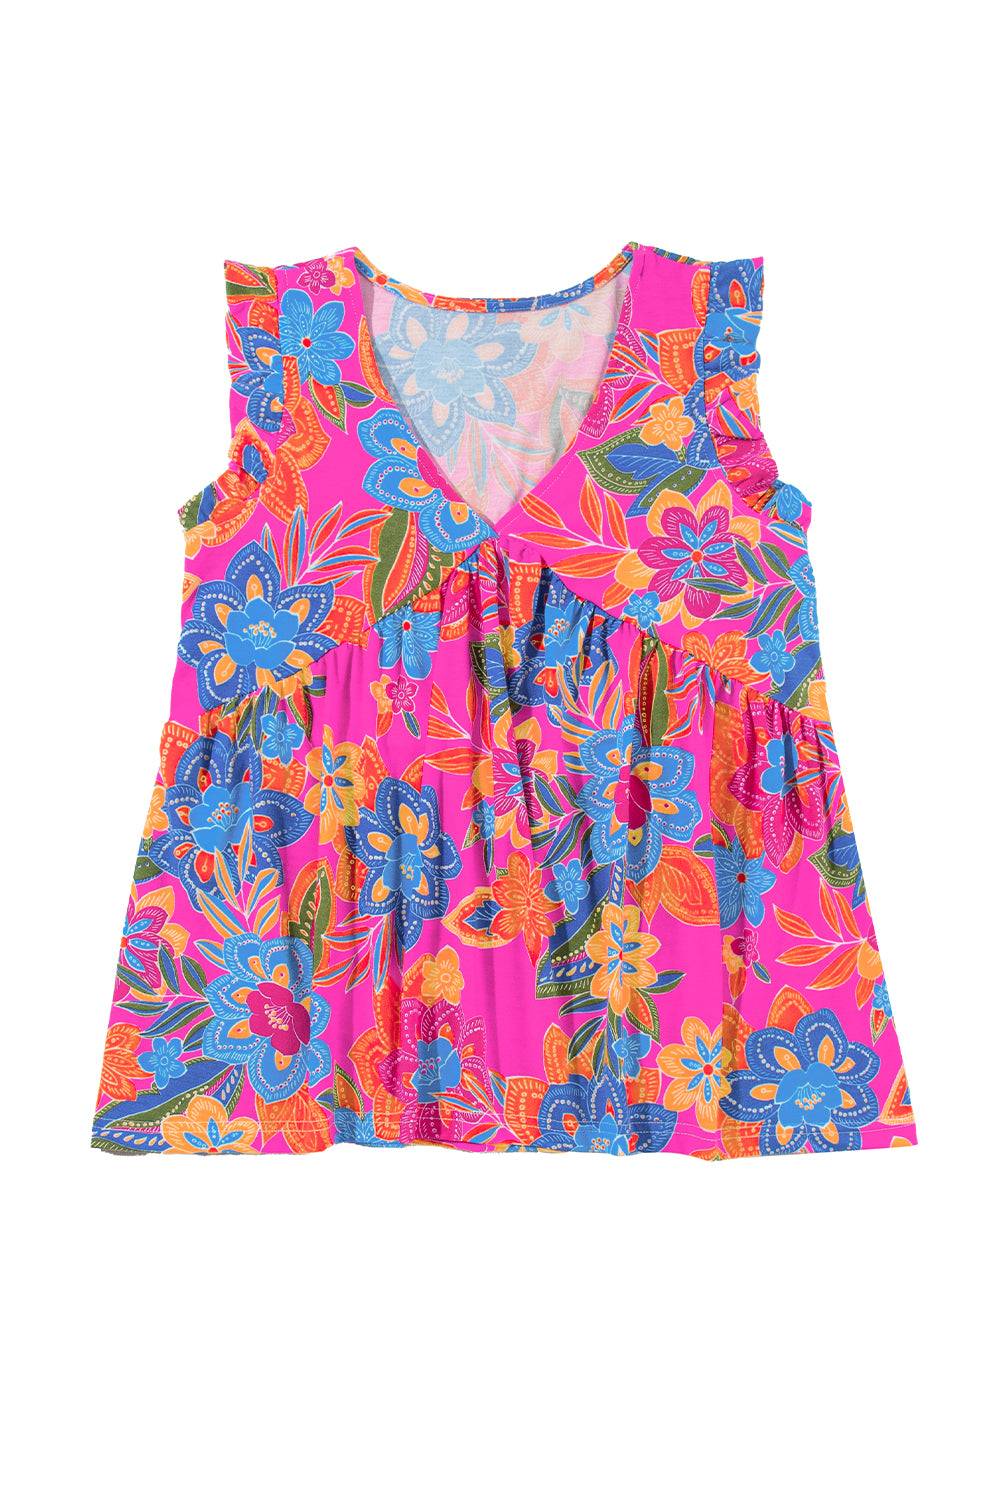 a pink top with blue and orange flowers on it